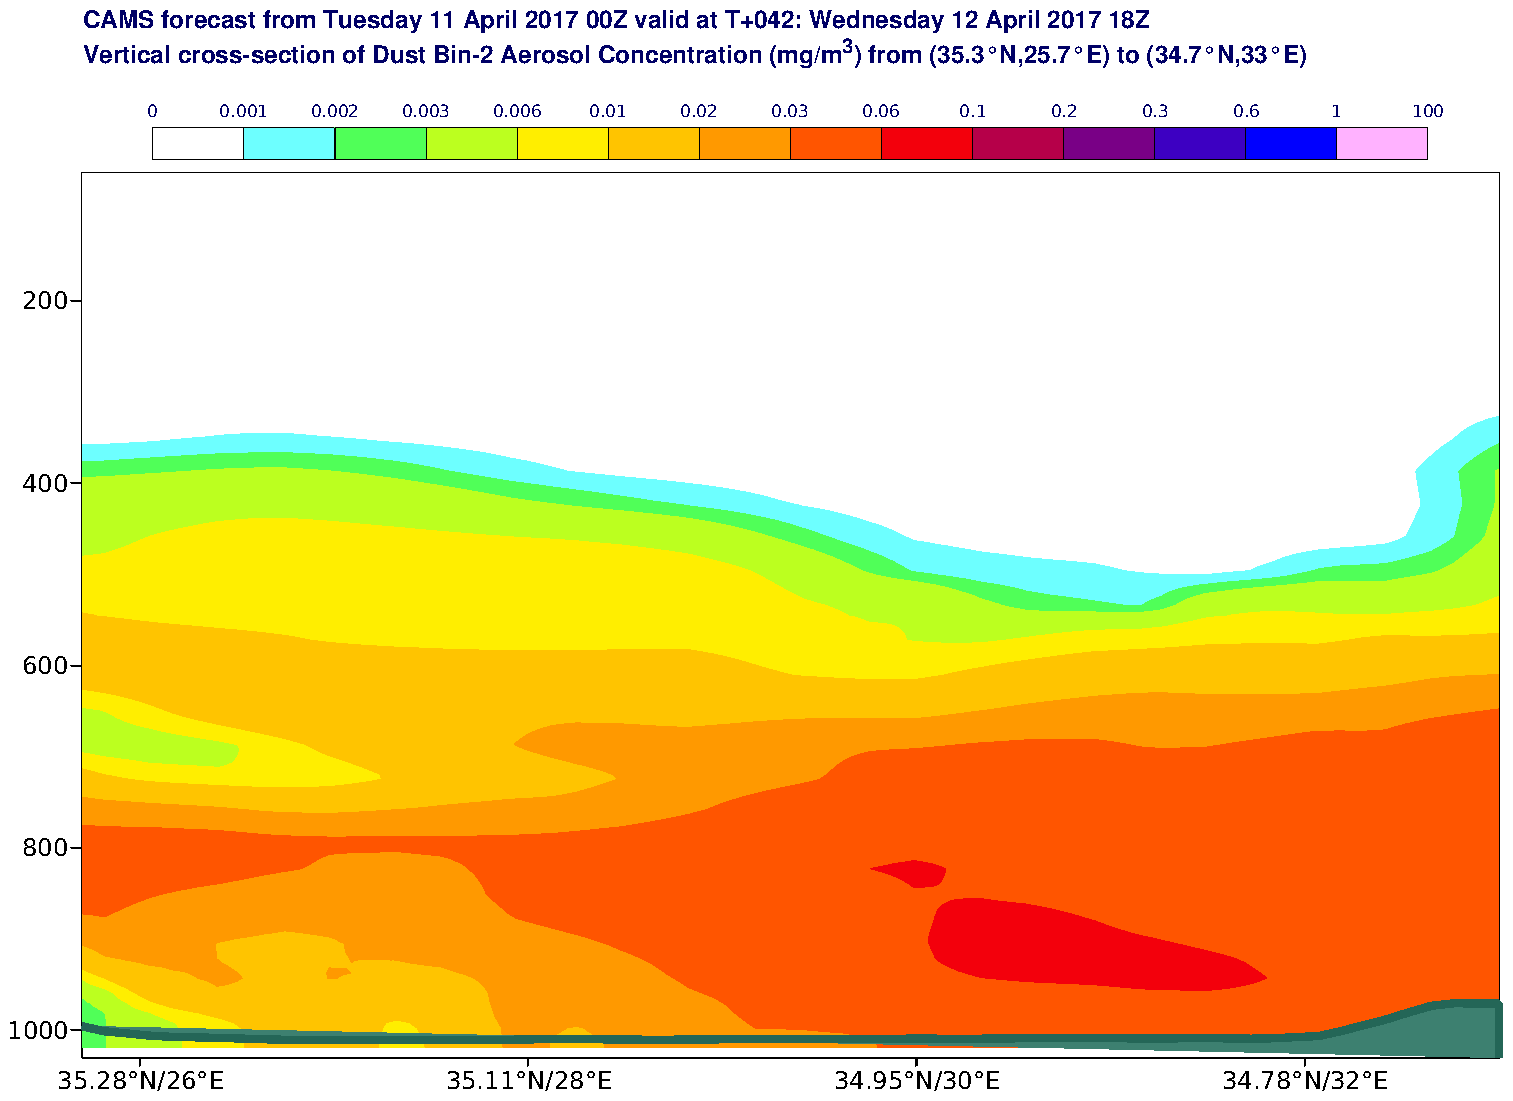 Vertical cross-section of Dust Bin-2 Aerosol Concentration (mg/m3) valid at T42 - 2017-04-12 18:00